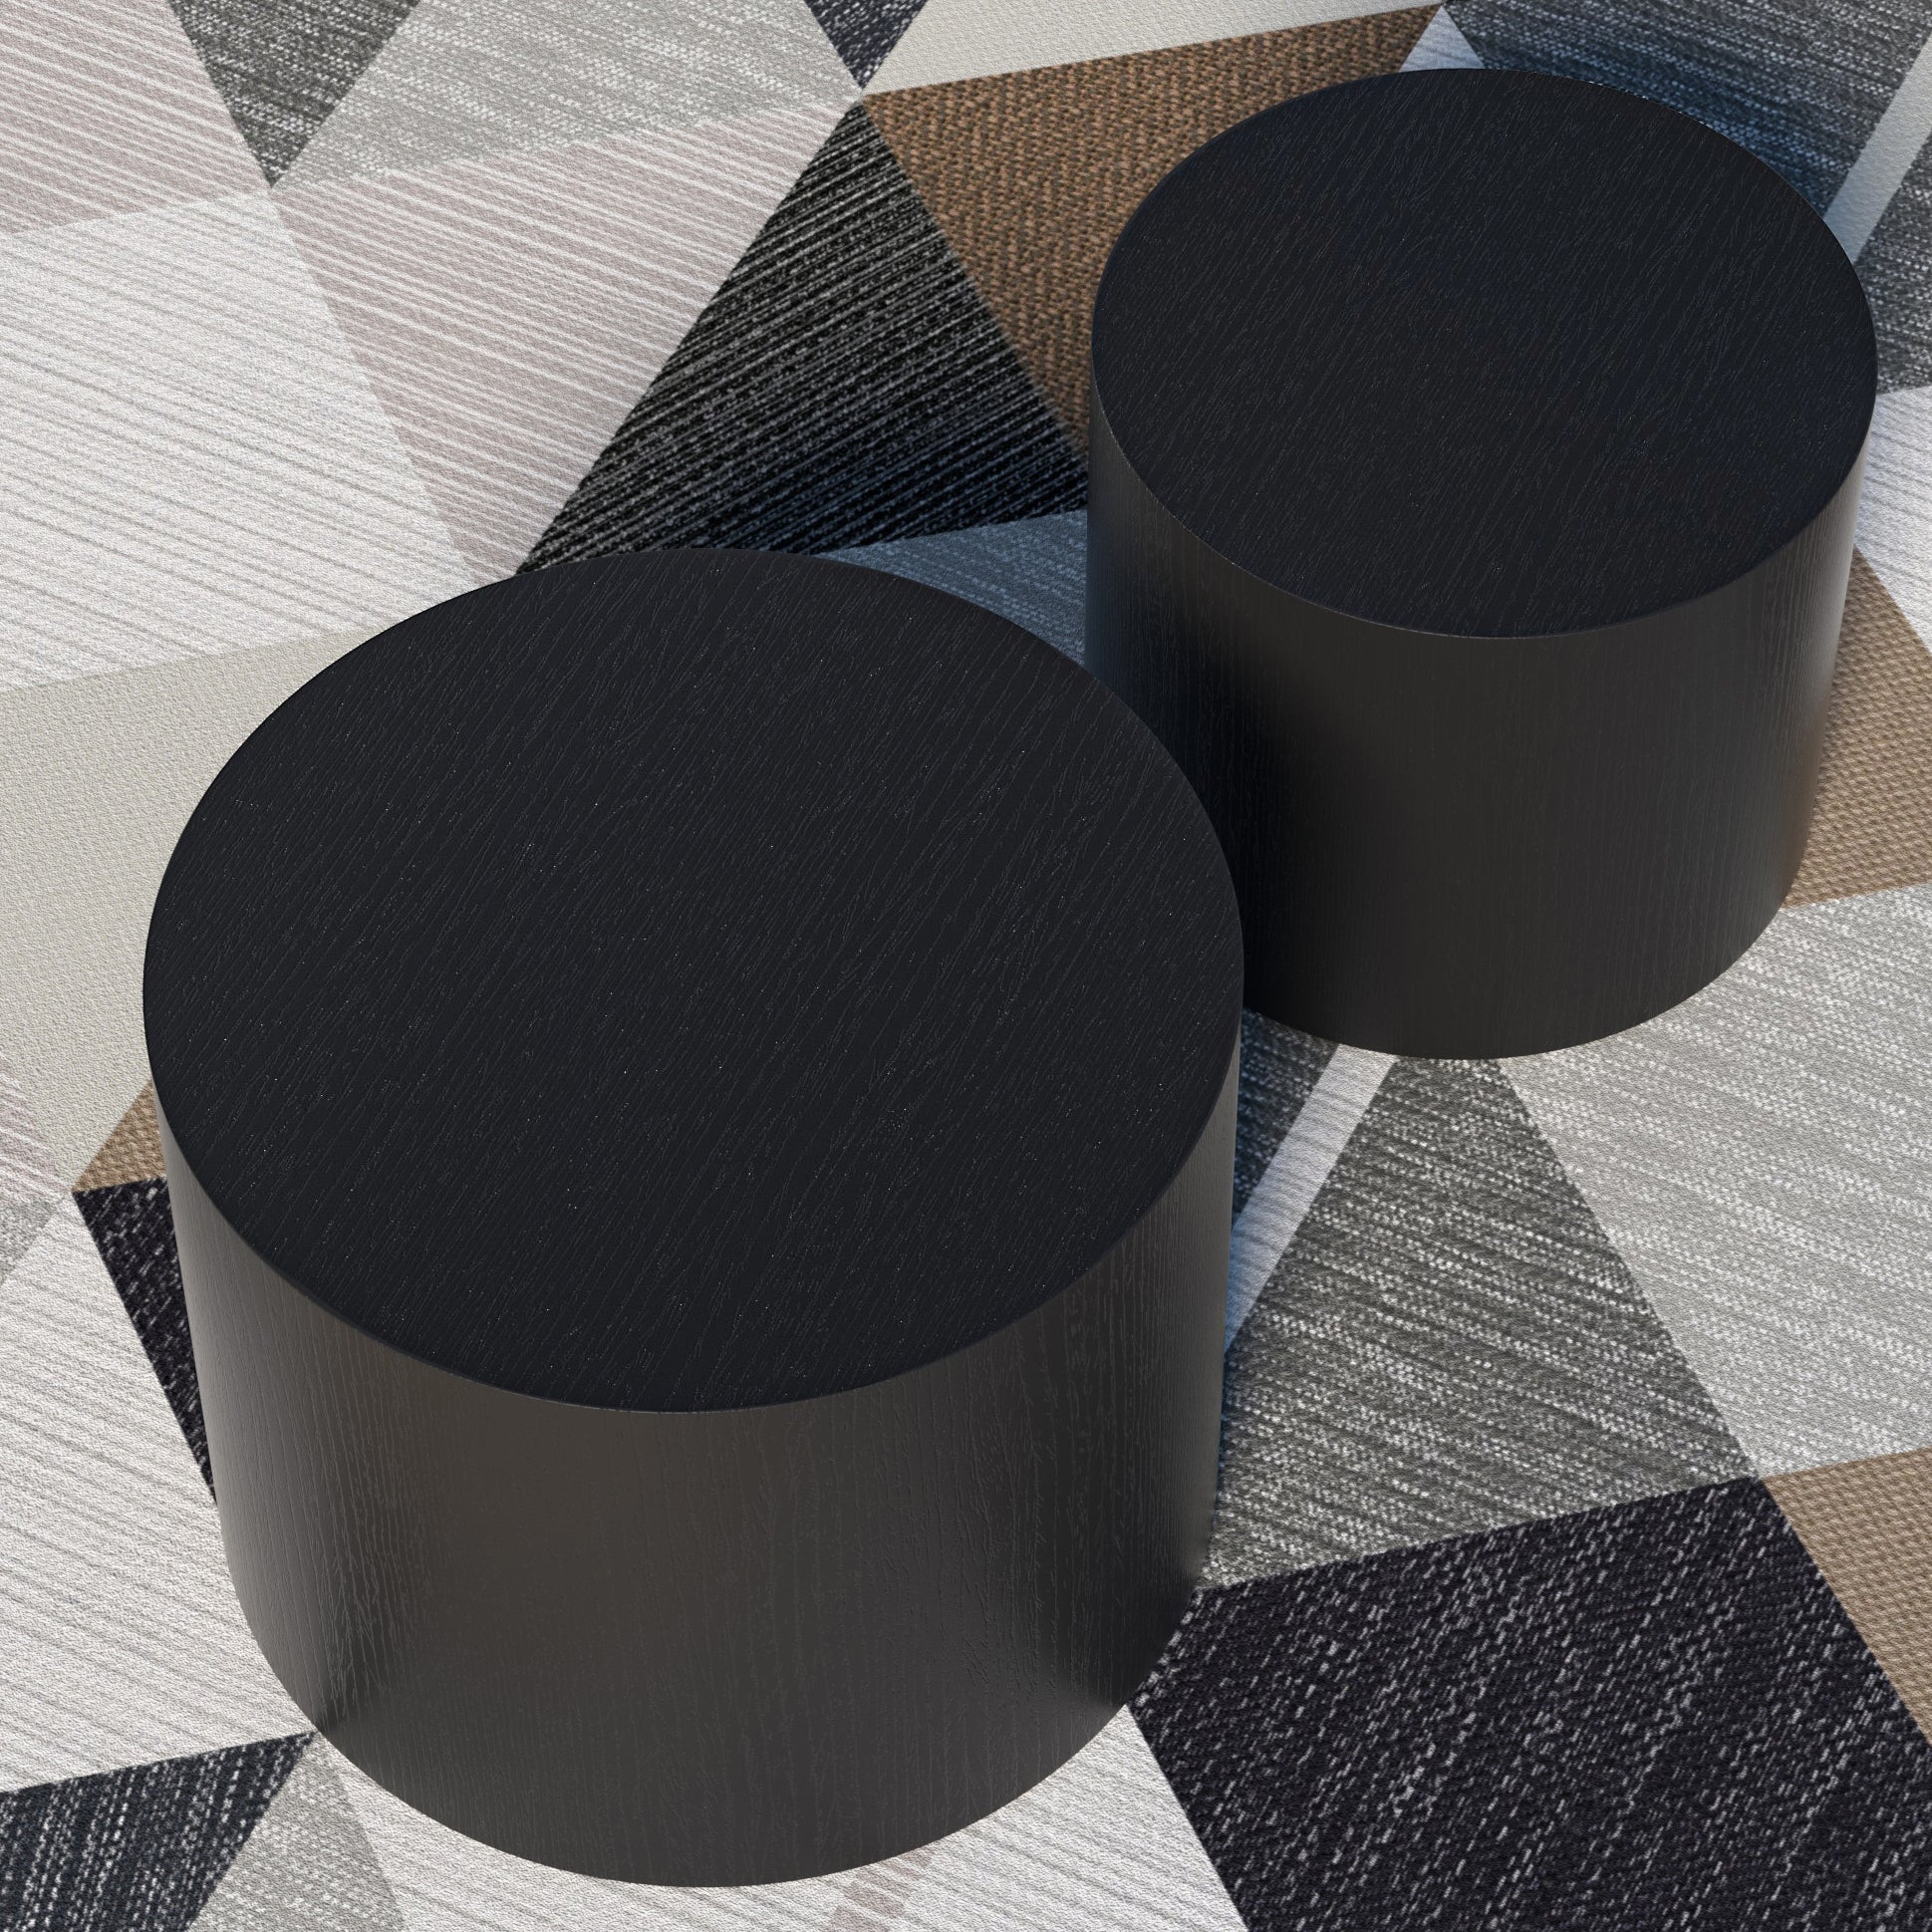 Modern 2 Piece Accent Table Set in Black